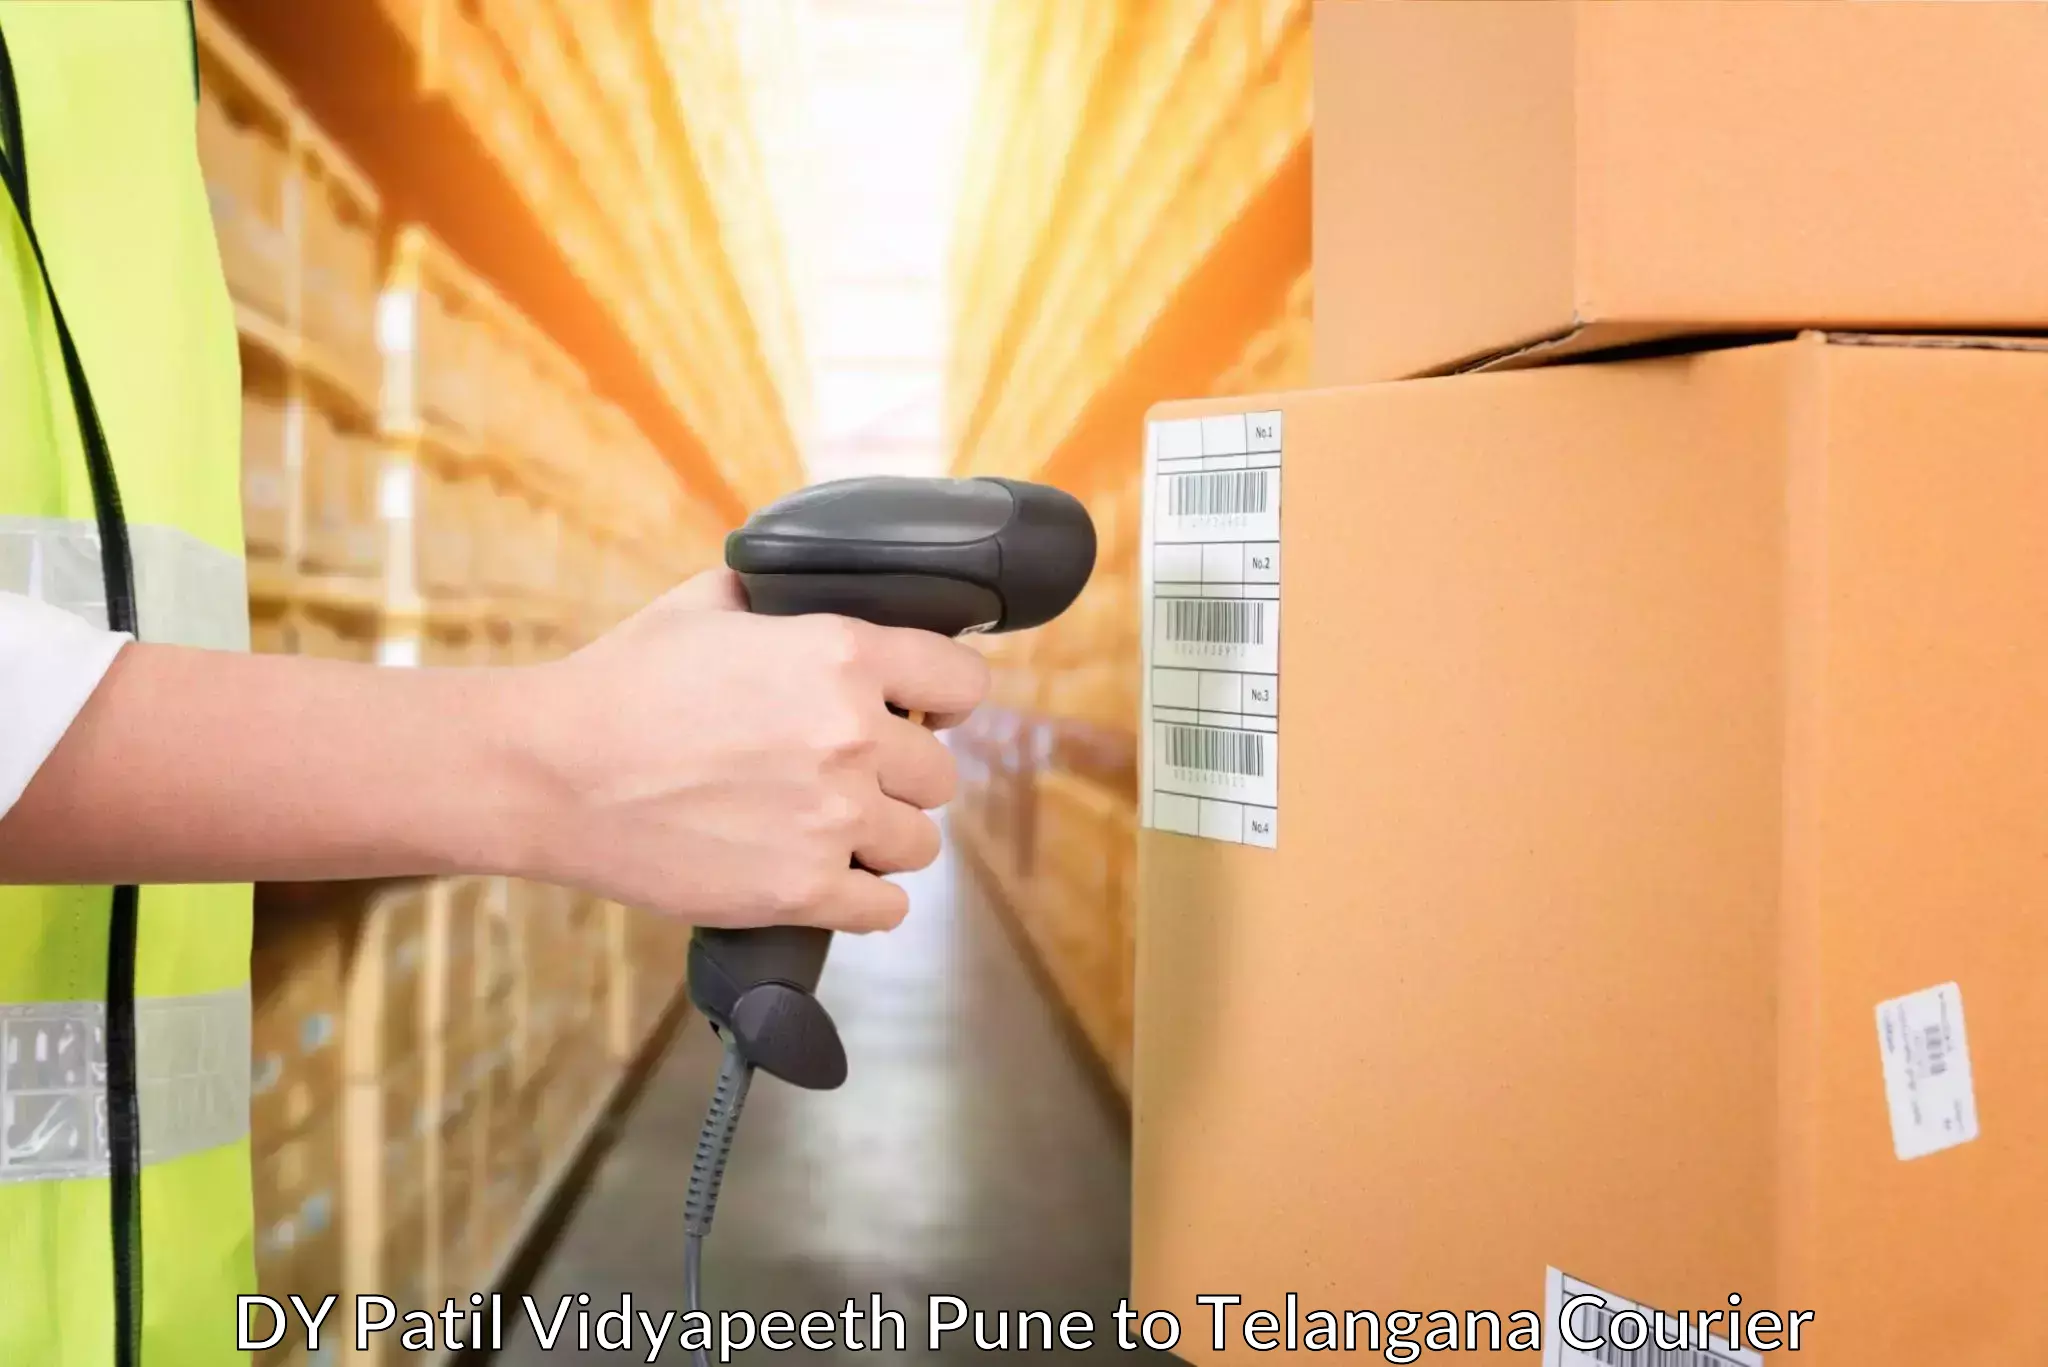 24/7 shipping services DY Patil Vidyapeeth Pune to International Institute of Information Technology Hyderabad